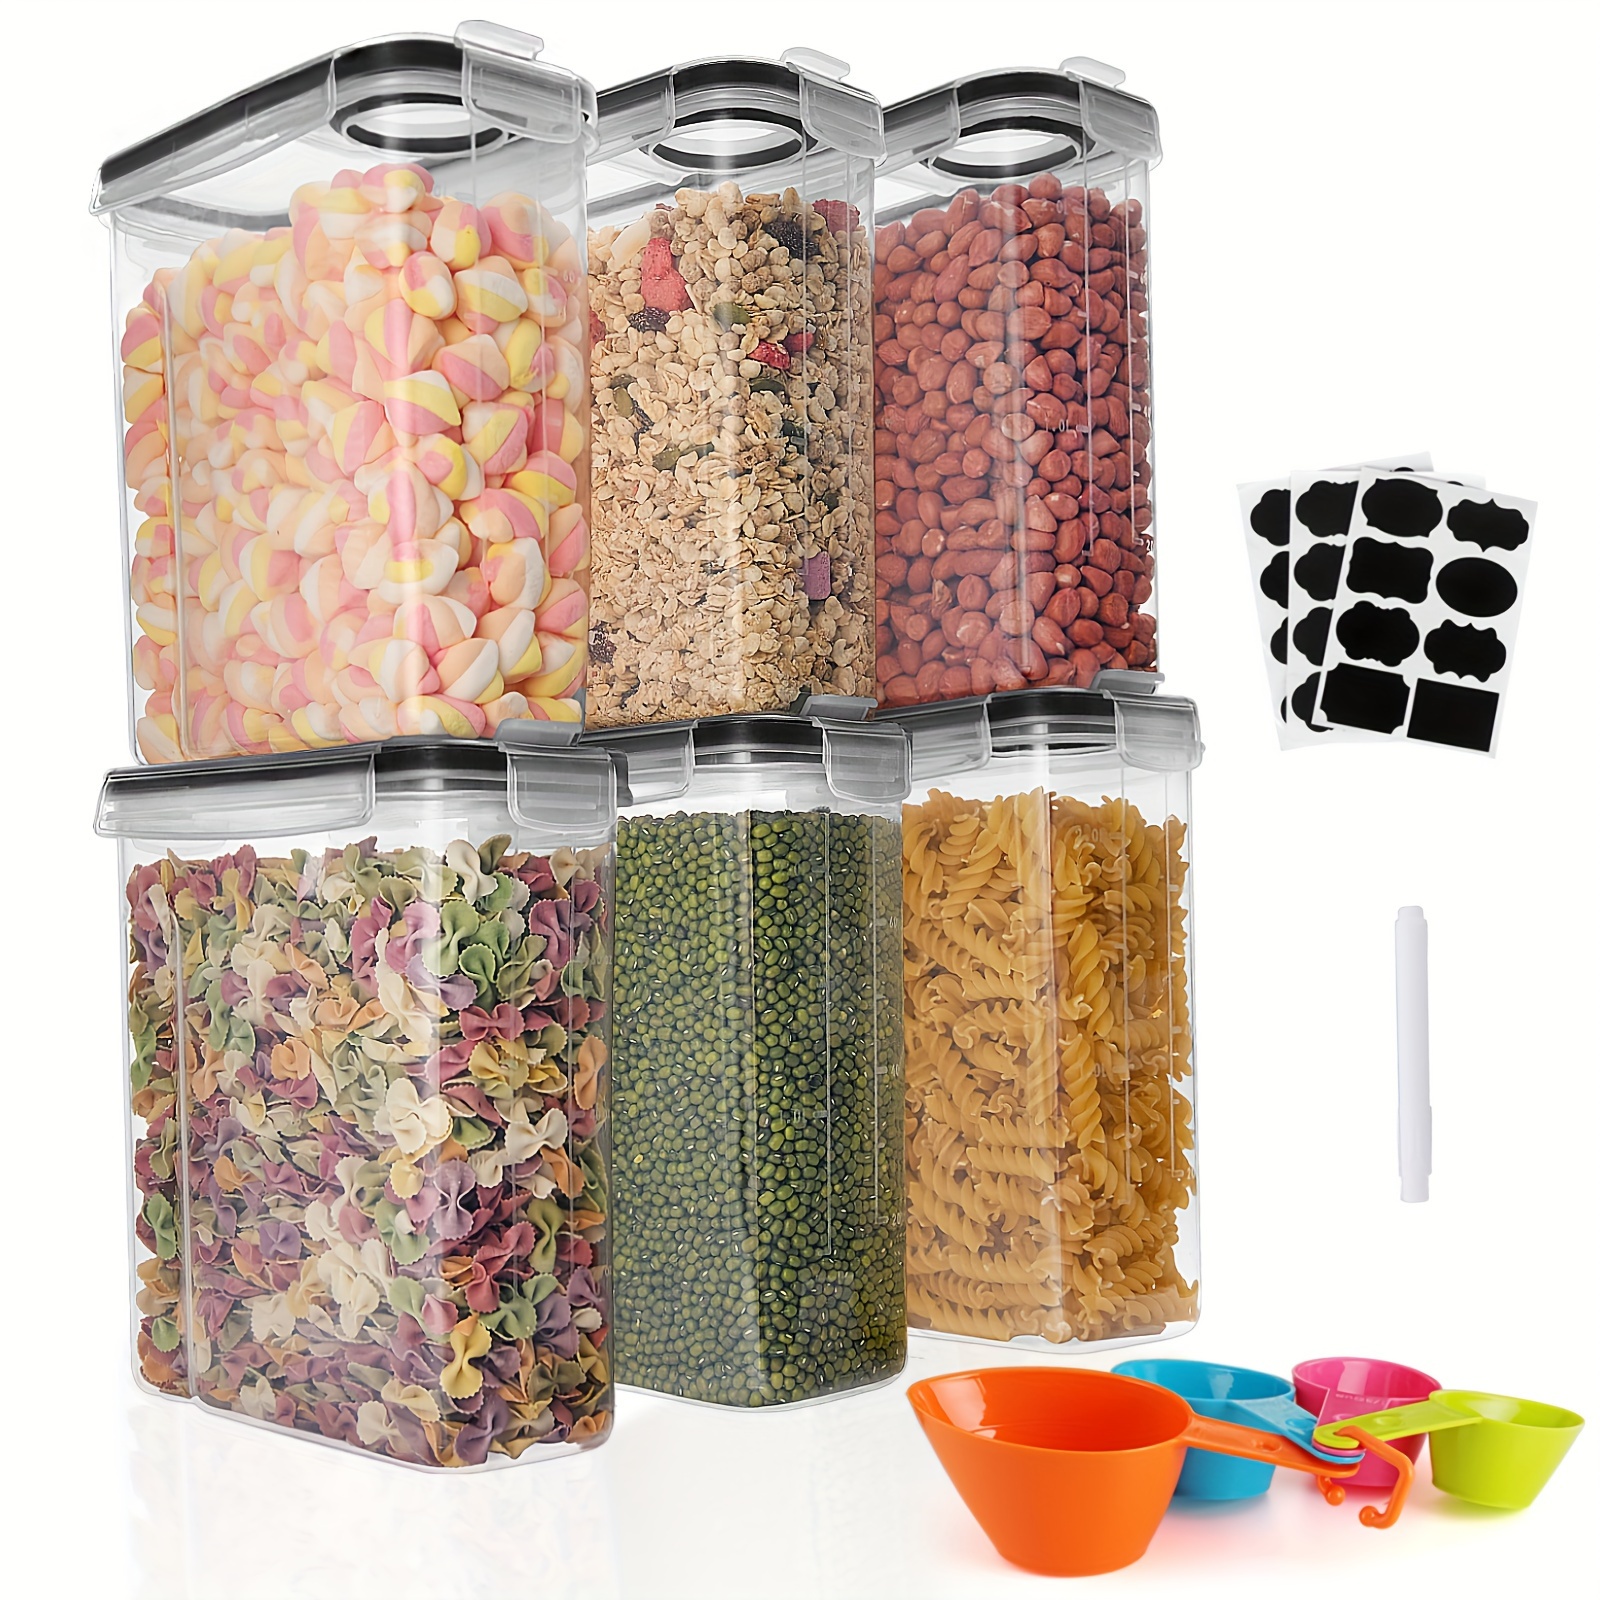 

6 Pack 2.5l Airtight Food Storage Containers With Lids For Kitchen Pantry Organization And Storage, Bpa Free, Plastic Canister Set For Cereal, Pasta, Flour & Sugar - Spoon Set, Labels & Marker